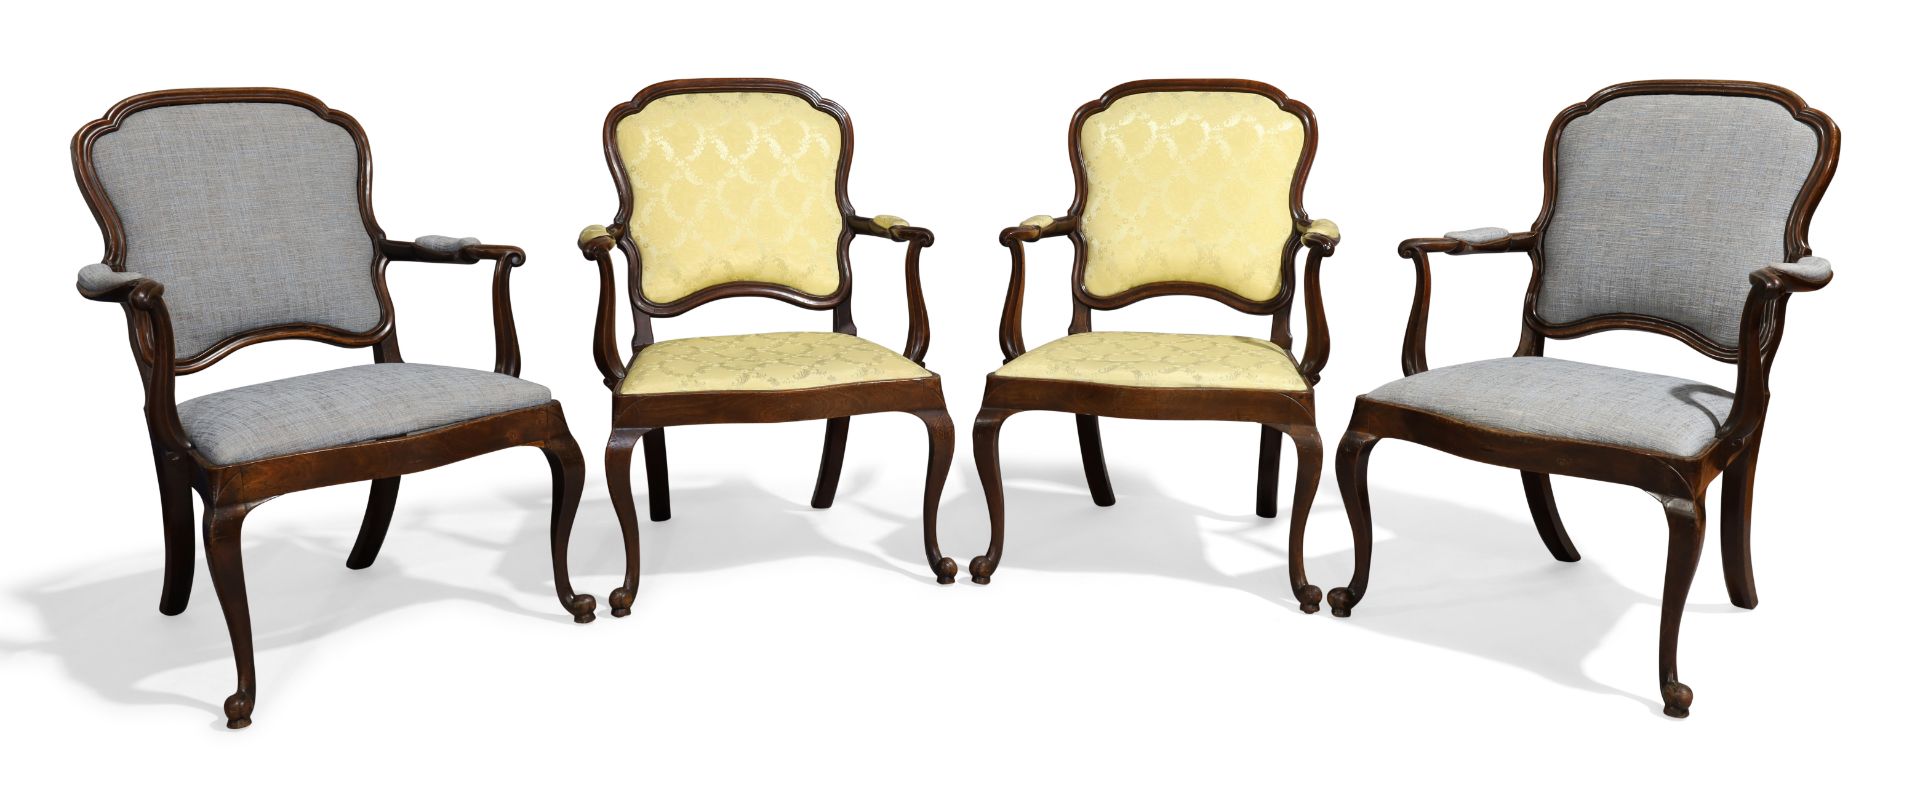 A set of four mahogany open fauteuils, late 18th century, possibly Portuguese, two upholstered in...